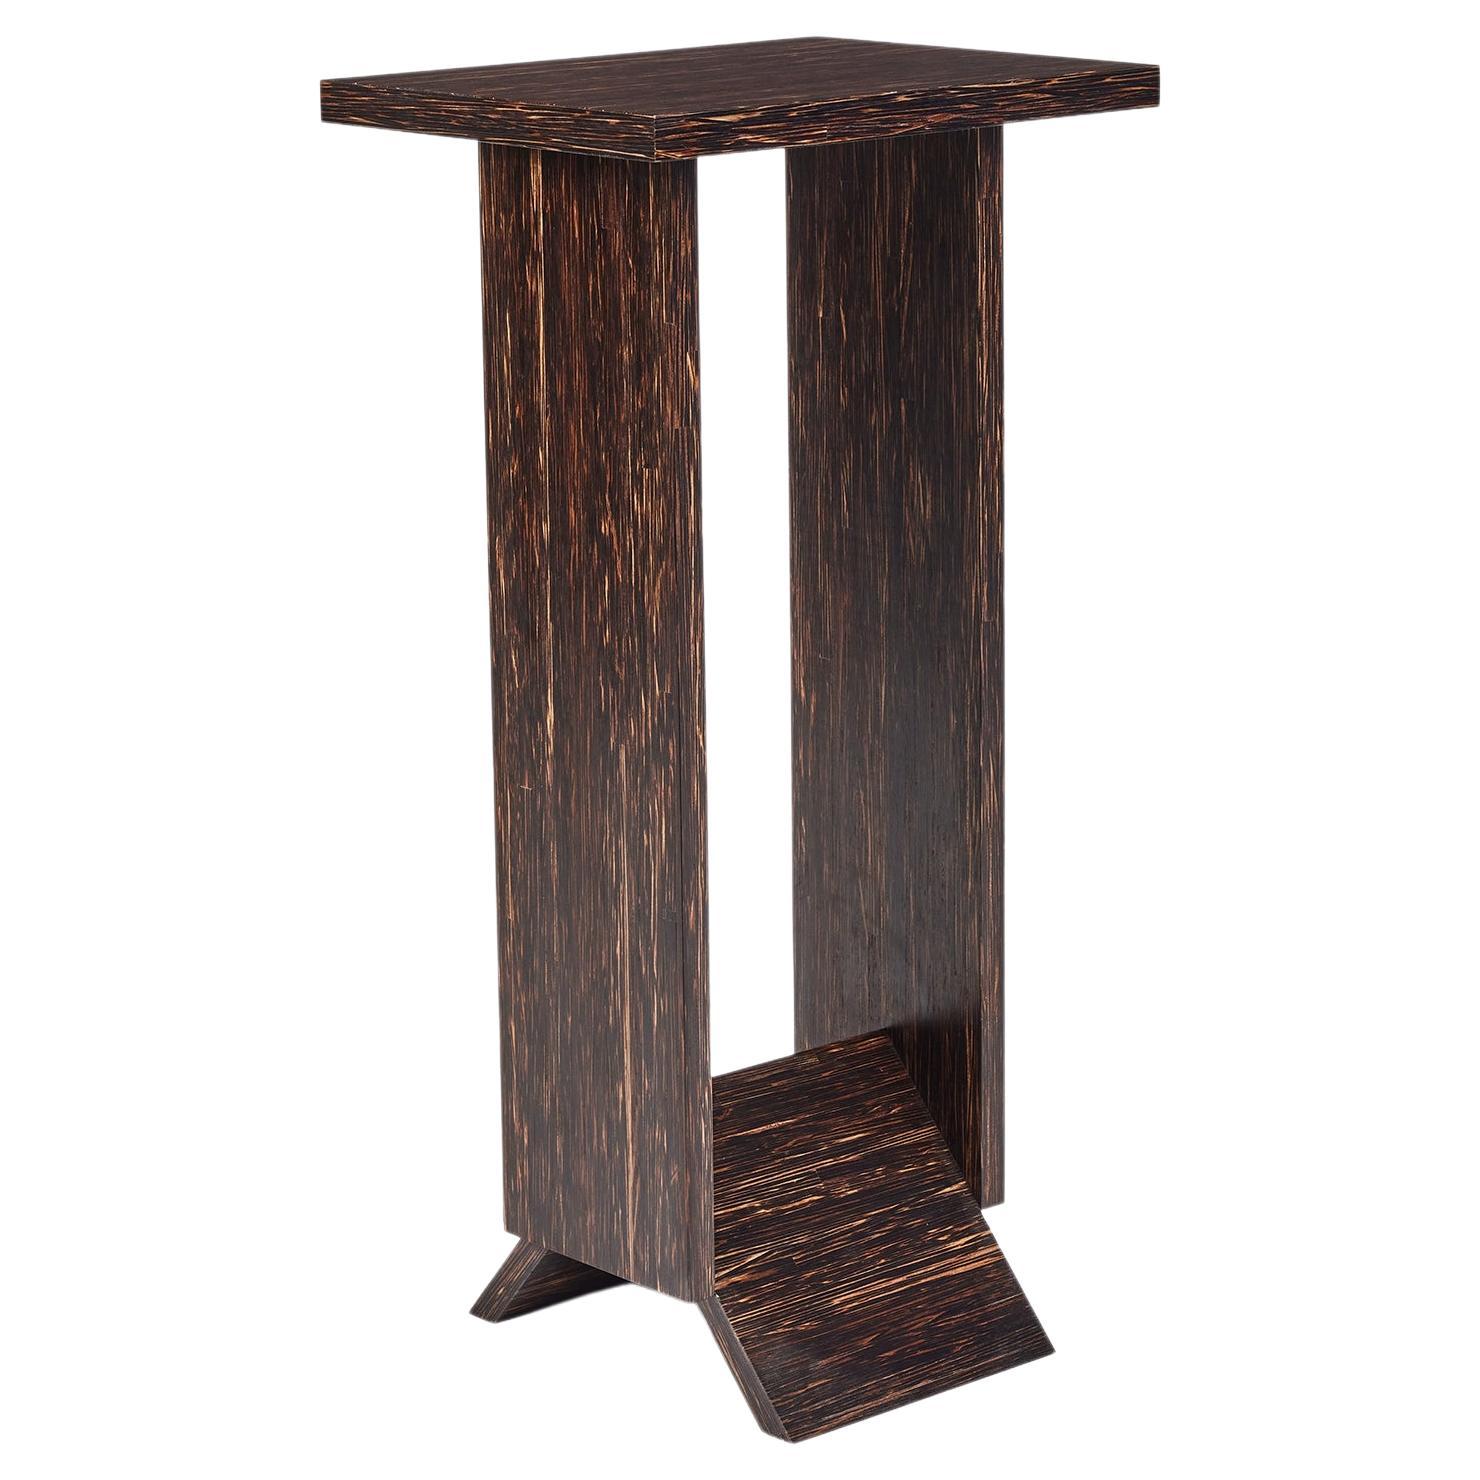 'Hotel de Tour' Palm Wood Pedestal Table in the Manner of Pierre Chareau For Sale